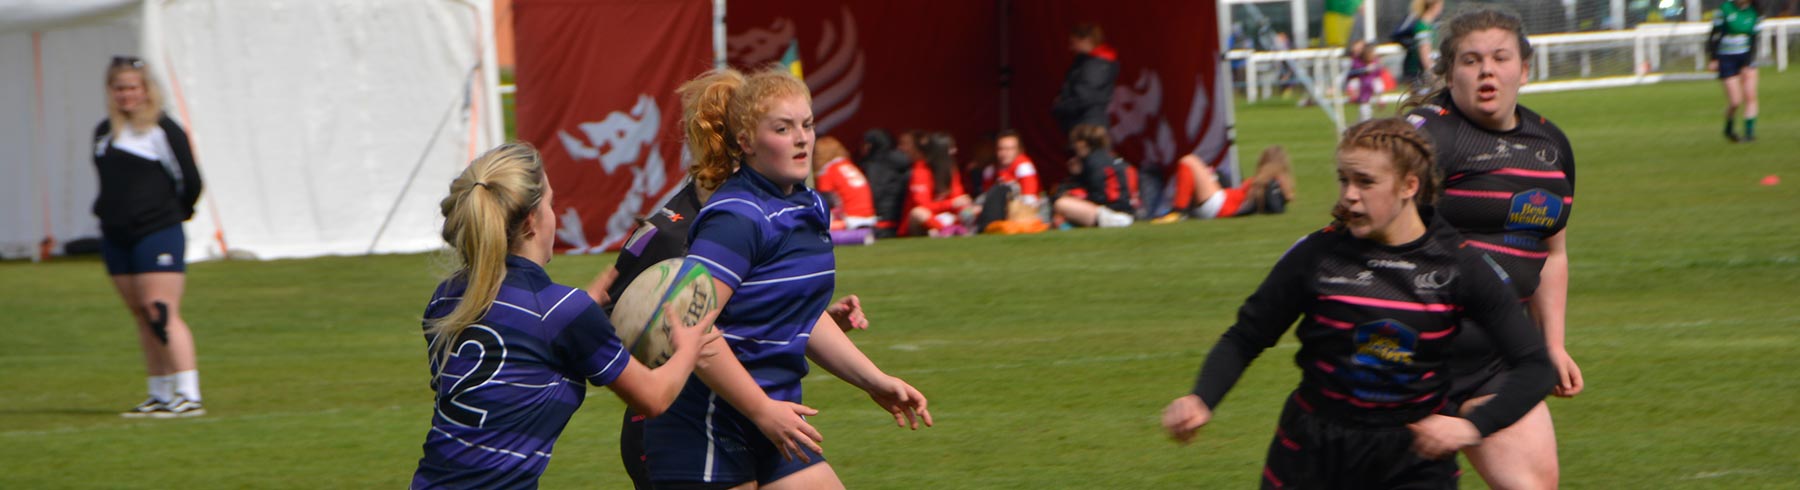 A mixed group of students playing rugby